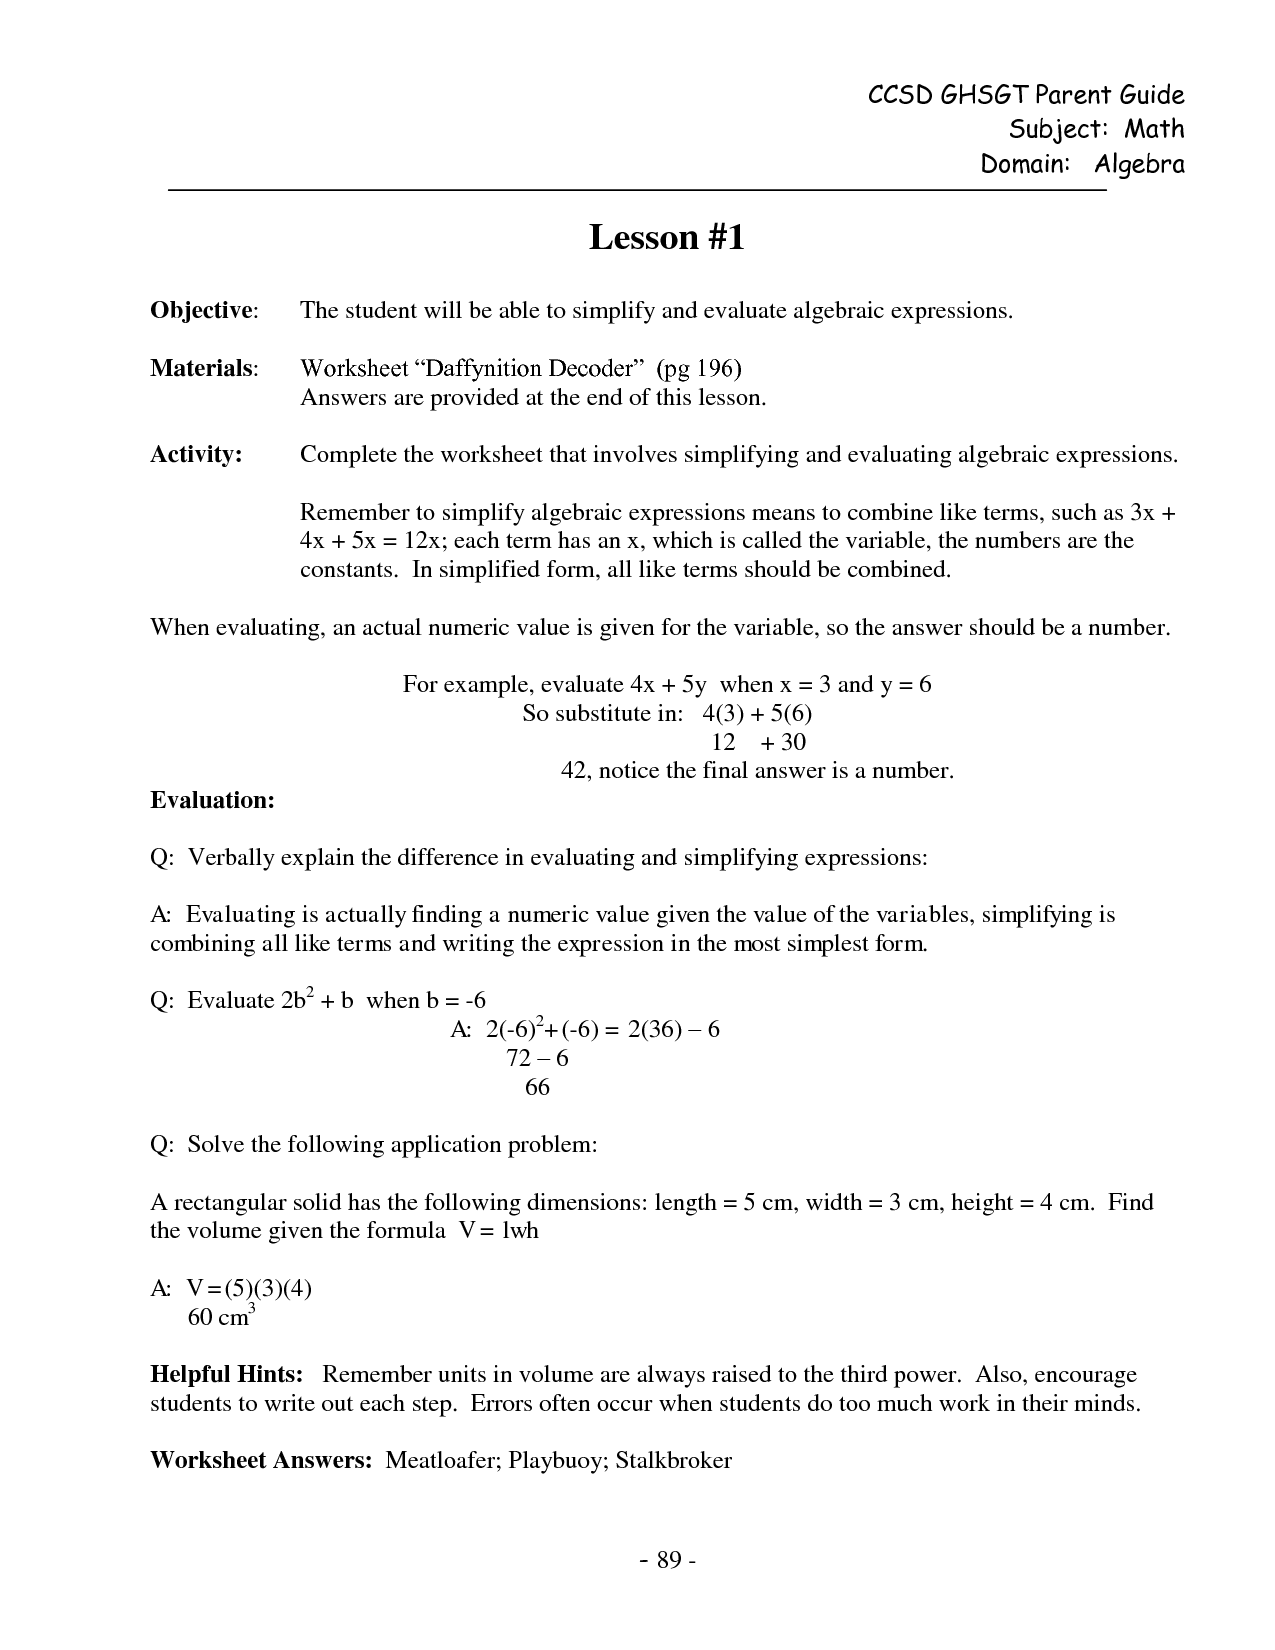 16-best-images-of-distributive-property-worksheets-printable-distributive-property-worksheets